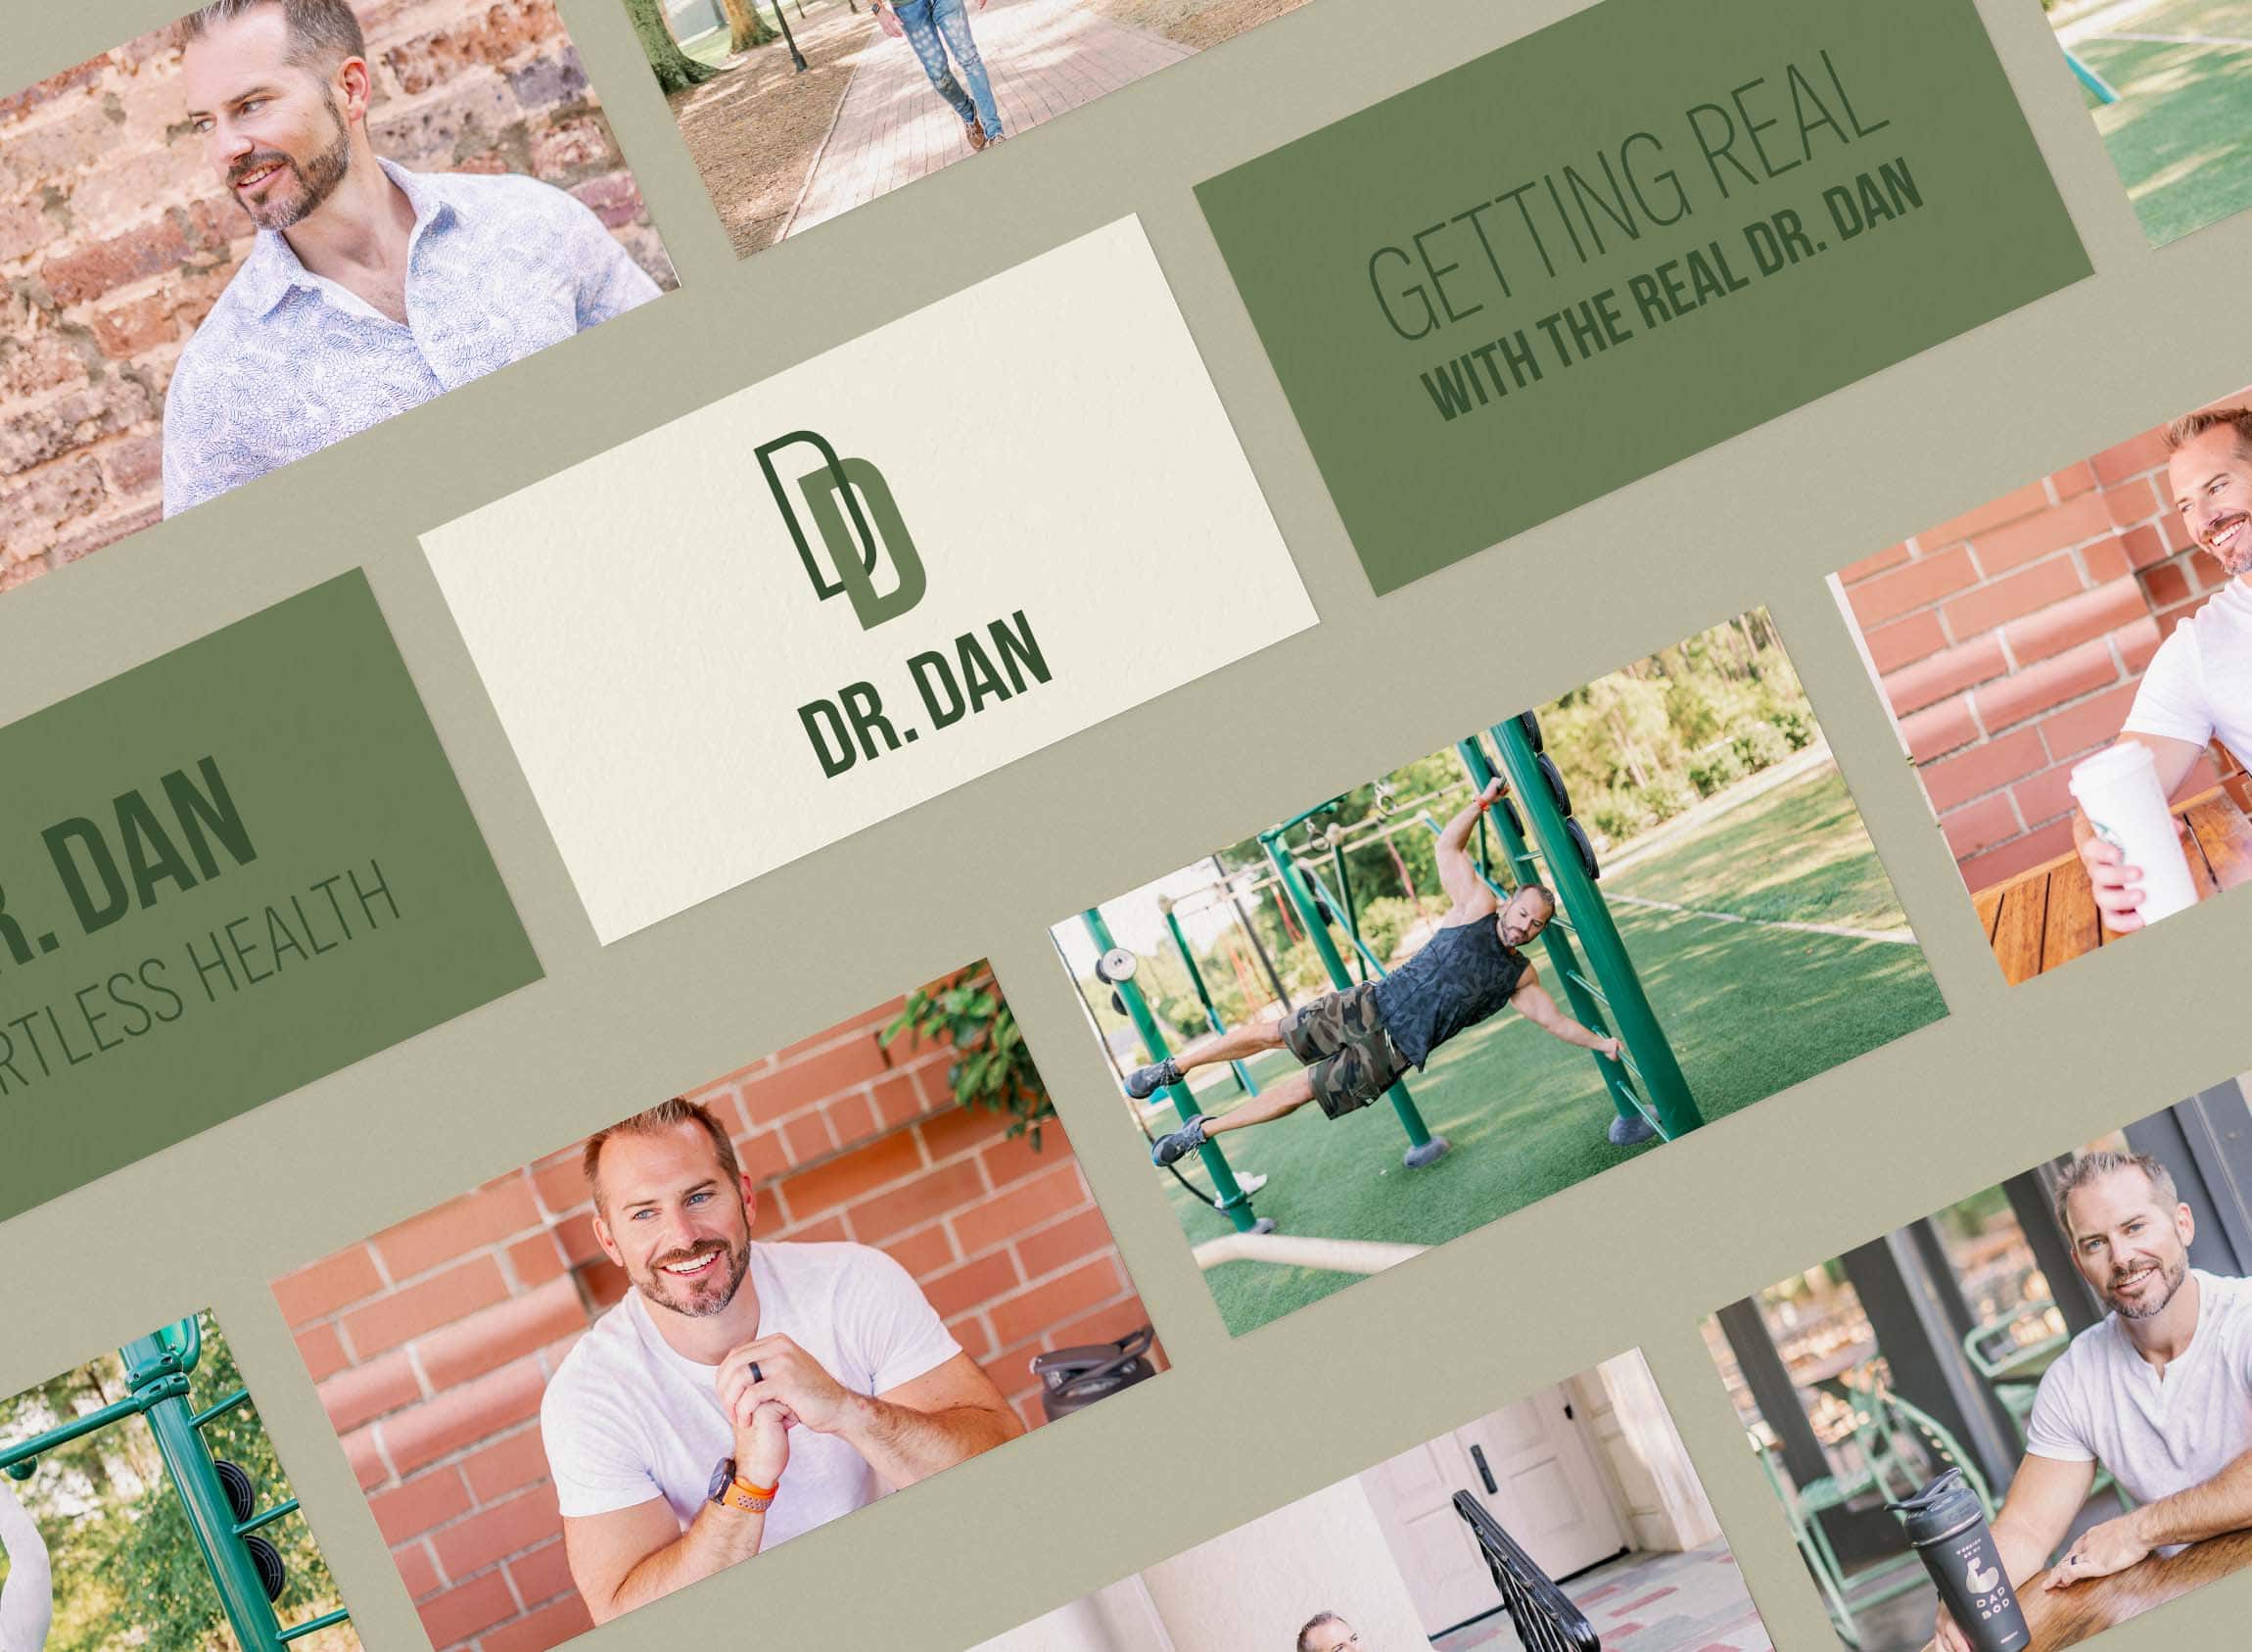 a variety of photos of Dr. Dan with his branding